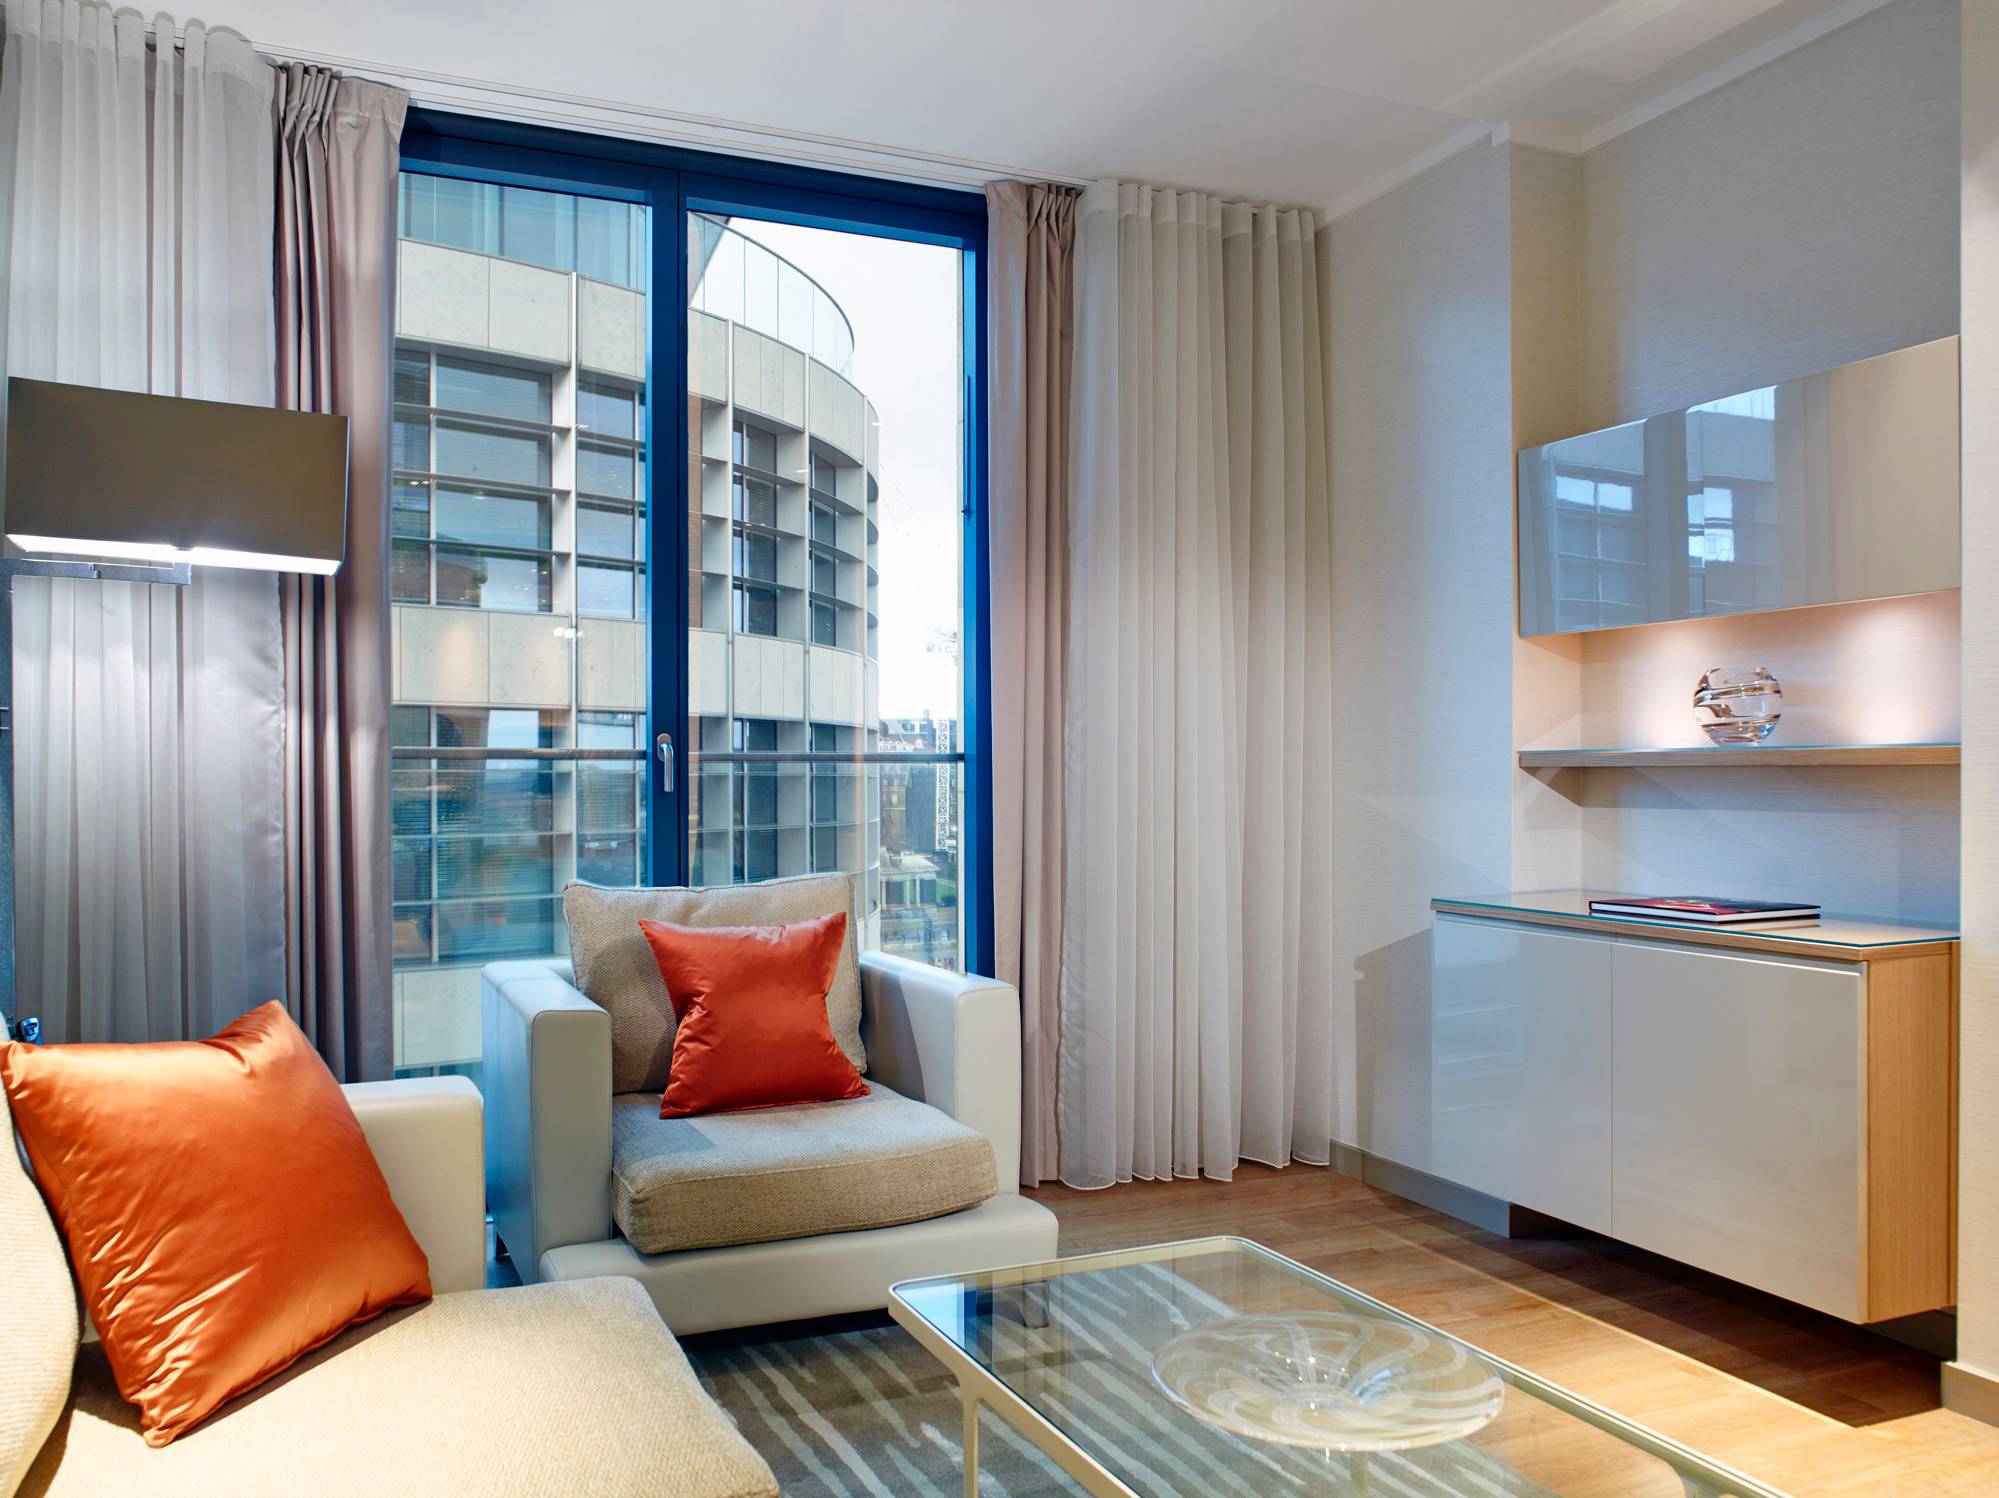 Superior One-Bedroom Serviced Apartment with City Views and Premium Amenities in Tower Bridge